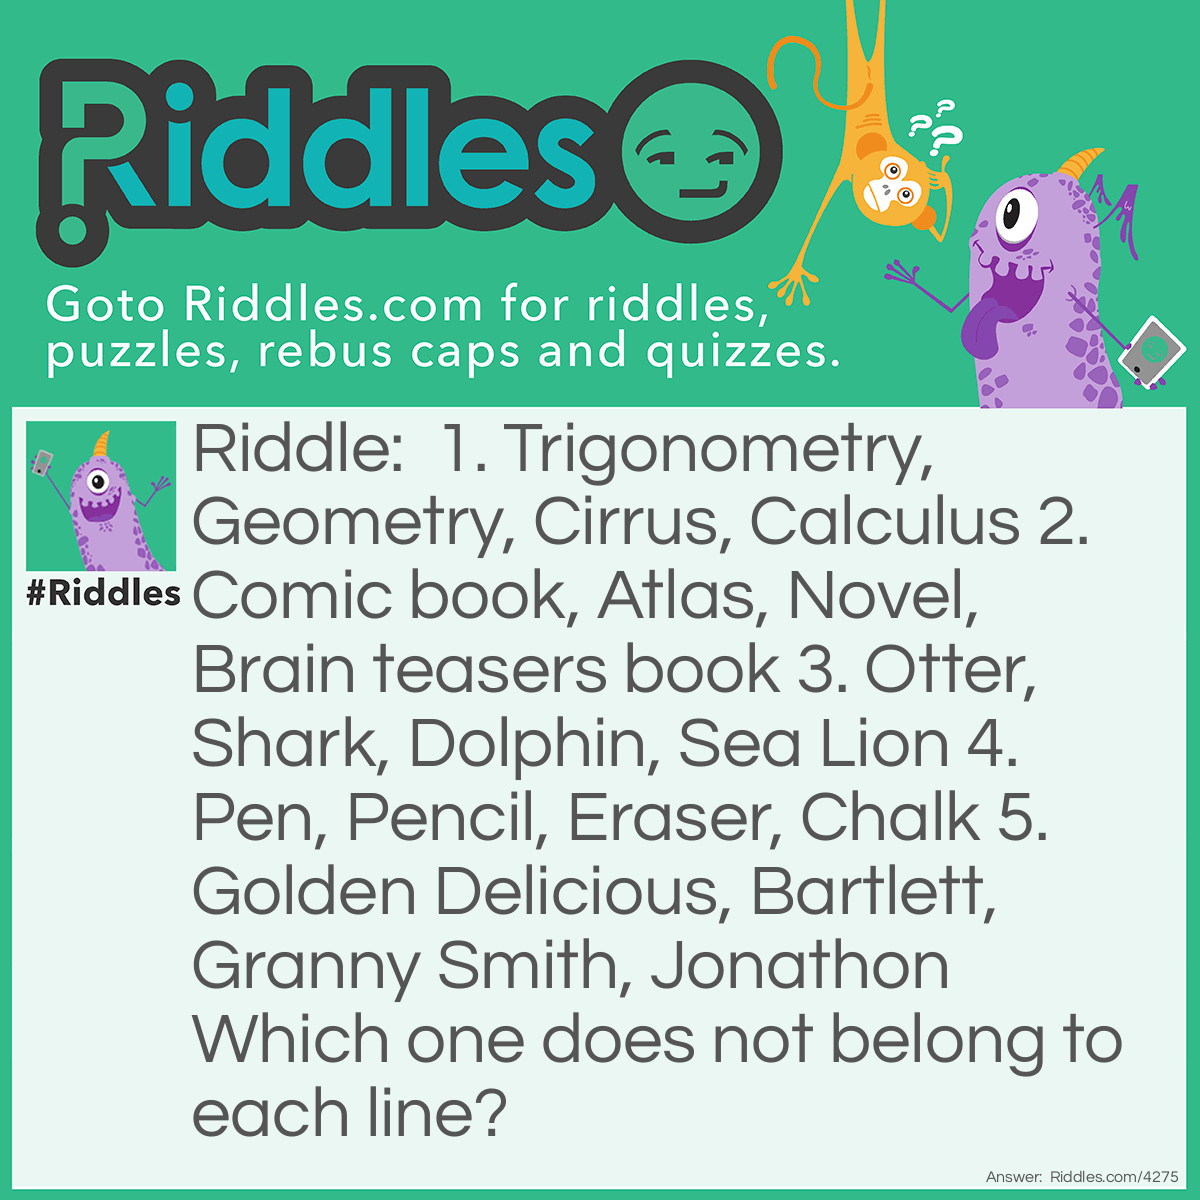 Riddle: 1. Trigonometry, Geometry, Cirrus, Calculus 
2. Comic book, Atlas, Novel, Brain teasers book 
3. Otter, Shark, Dolphin, Sea Lion 
4. Pen, Pencil, Eraser, Chalk 
5. Golden Delicious, Bartlett, Granny Smith, Jonathon 
Which one does not belong to each line? Answer: 1. Cirrus because the others are all mathematics
2. Atlas because the others are all for leisure/pleasure reading
3. Shark because the others are all marine mammals
4. Chalk because the others are all desk tools
5. Bartlett because the others are types of apples